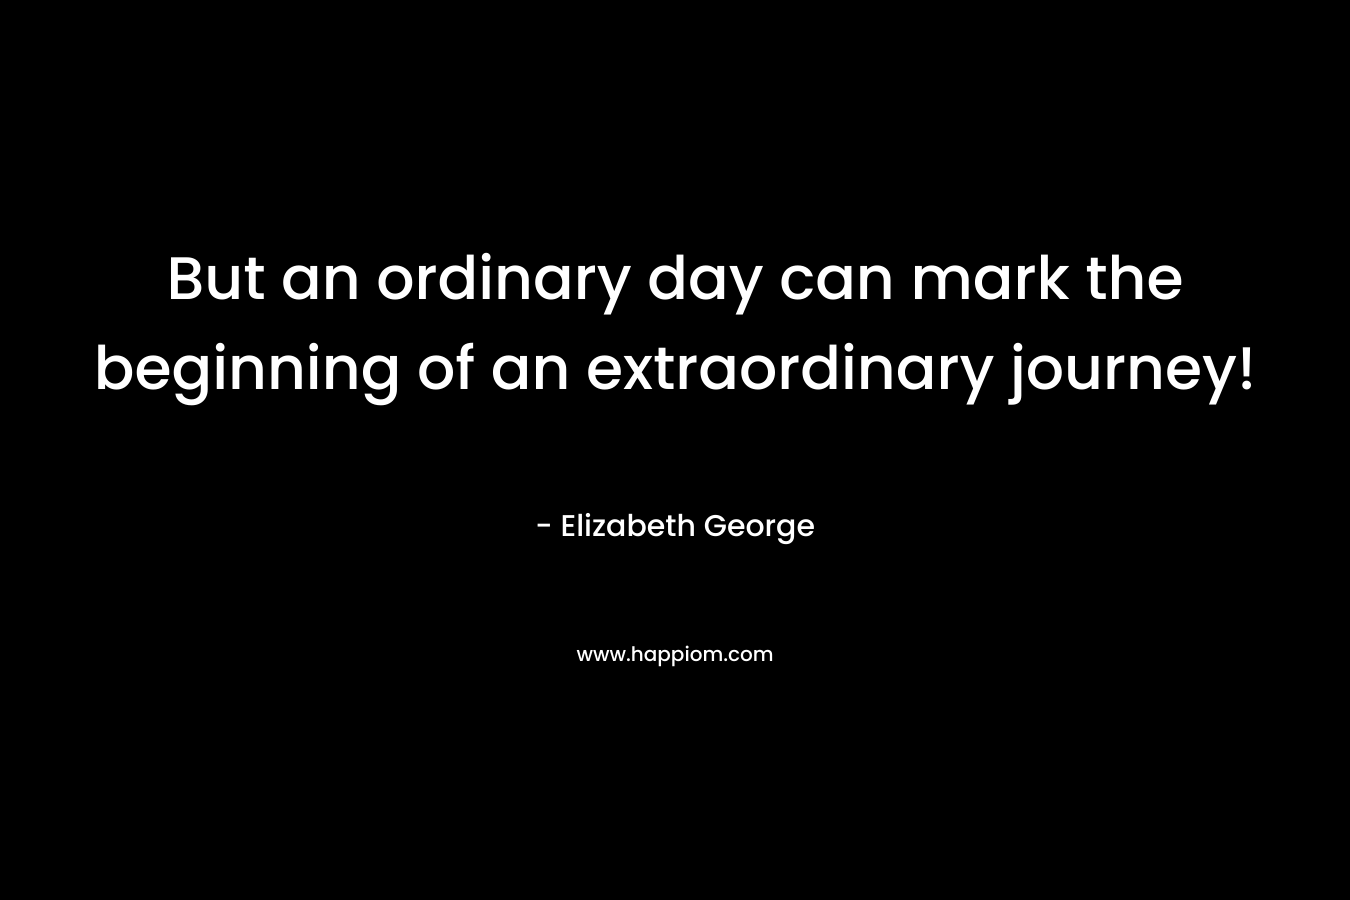 But an ordinary day can mark the beginning of an extraordinary journey!